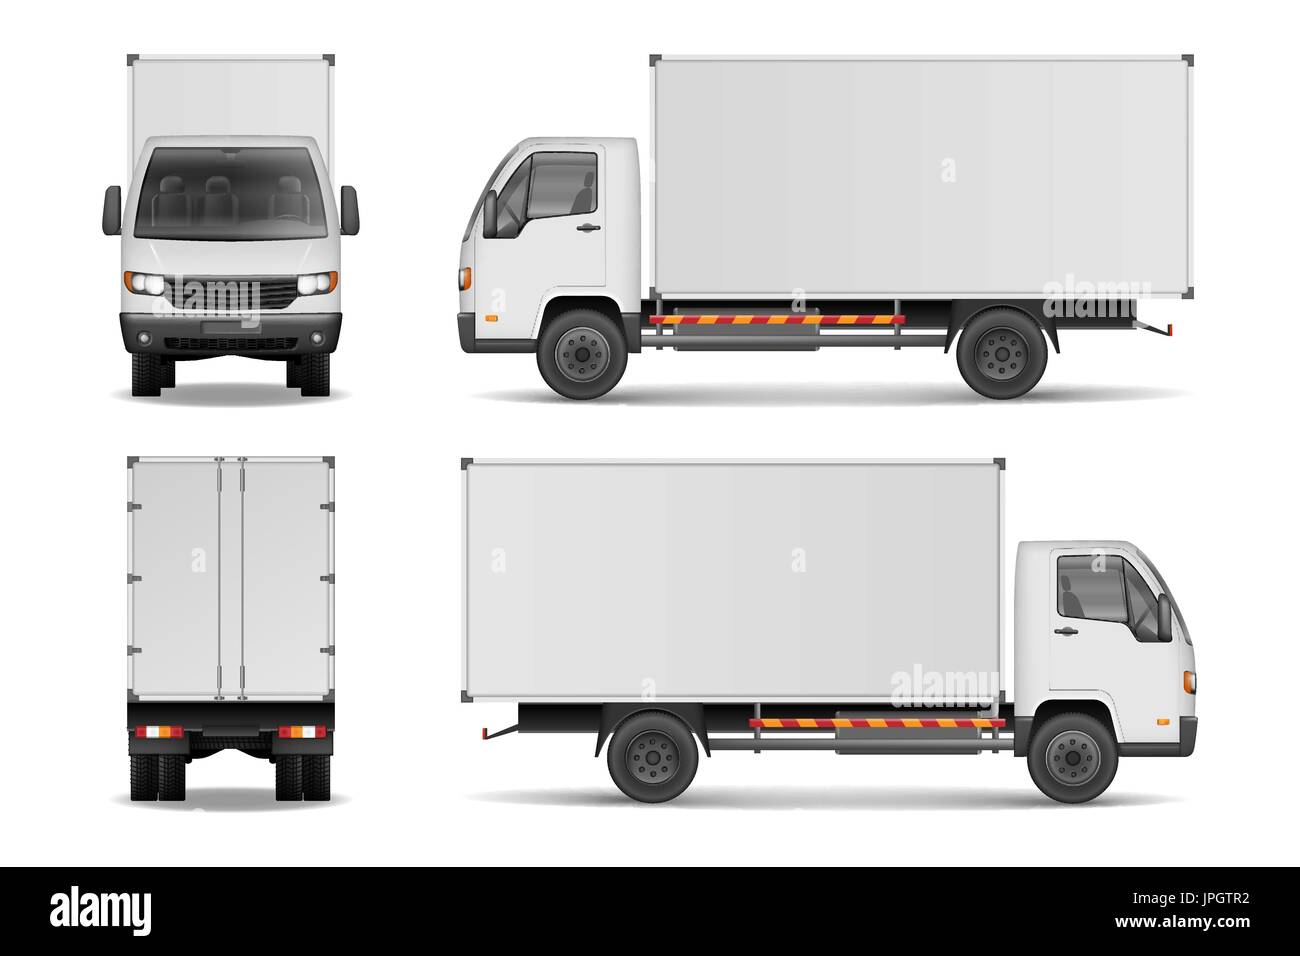 White realistic delivery cargo truck. Lorry for advertising side, front and rear view isolated on white background. Delivery cargo truck vector illustration mockup. Stock Vector